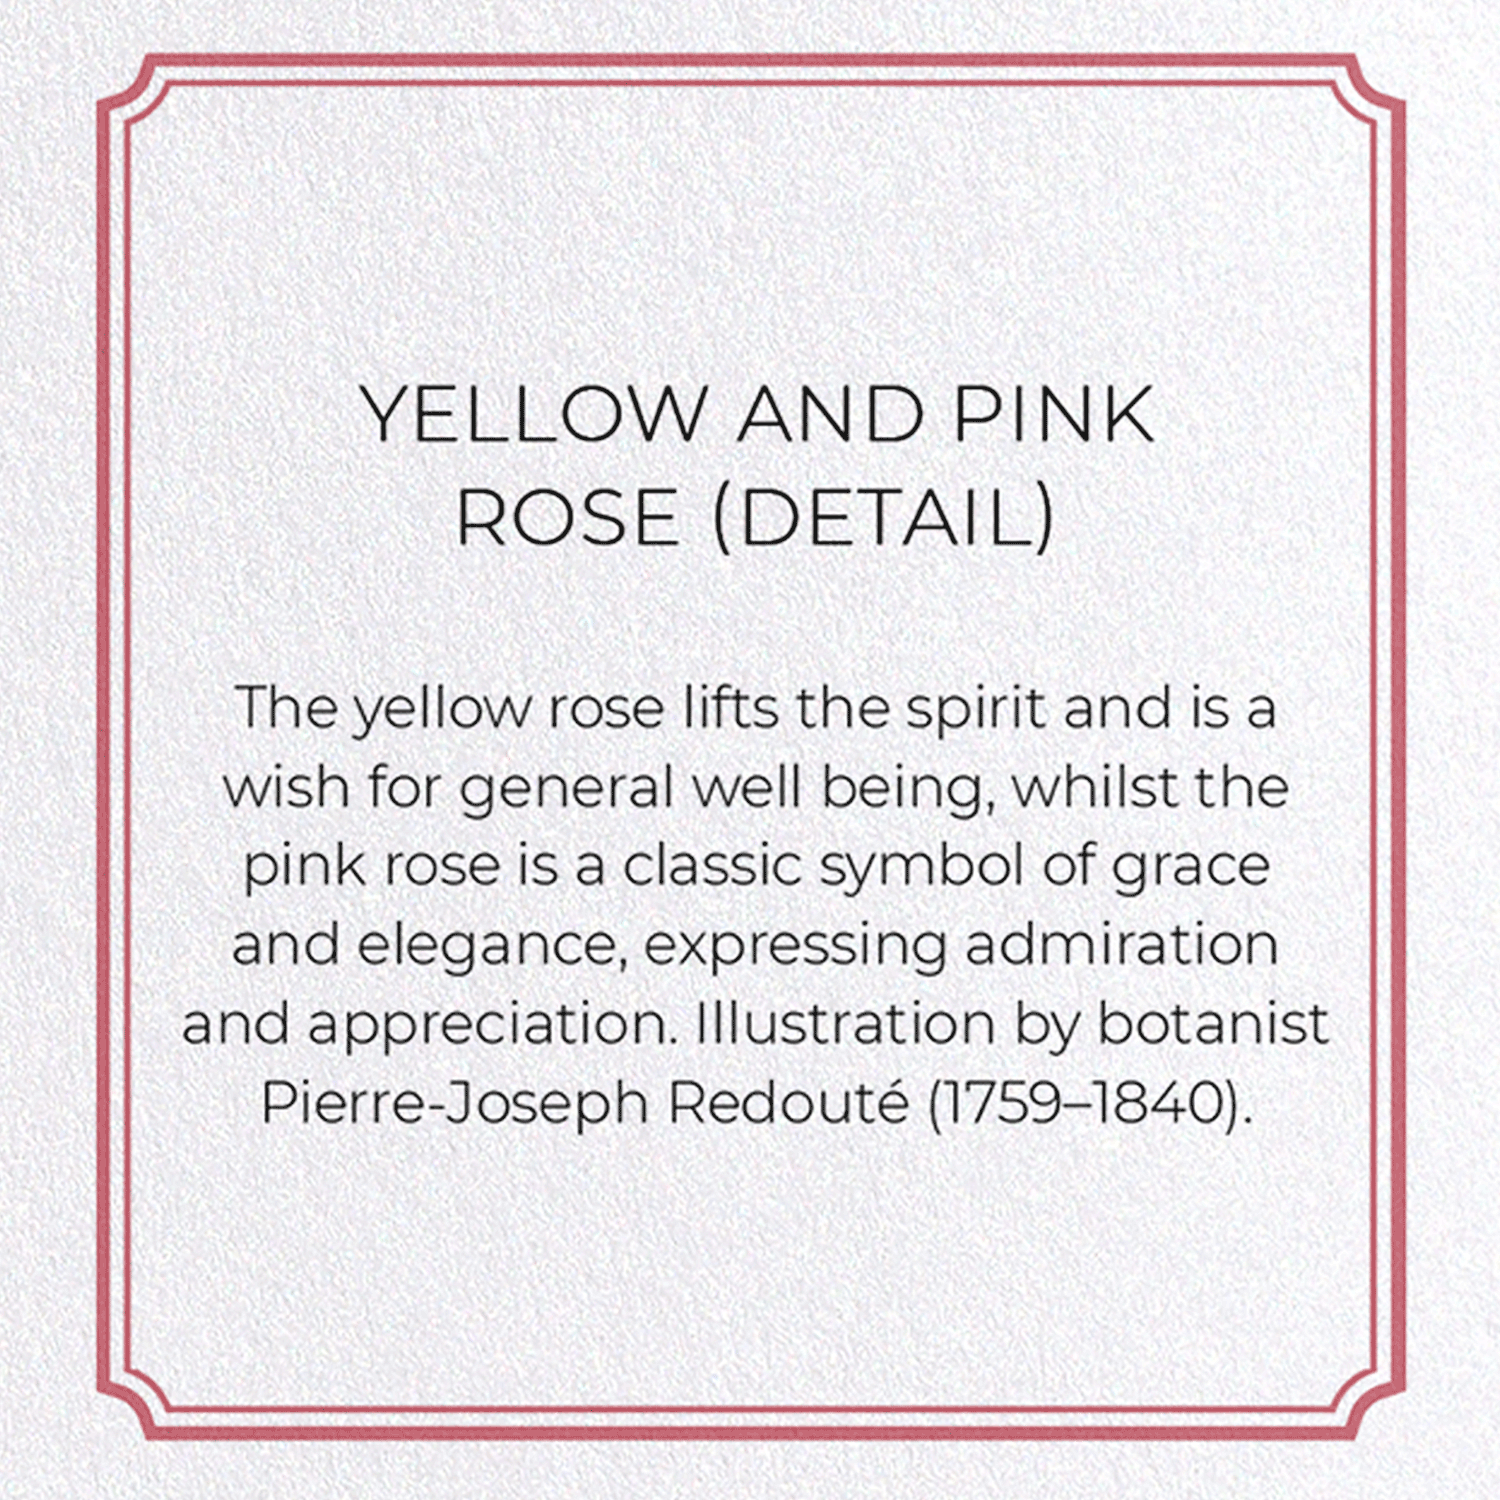 YELLOW AND PINK ROSE